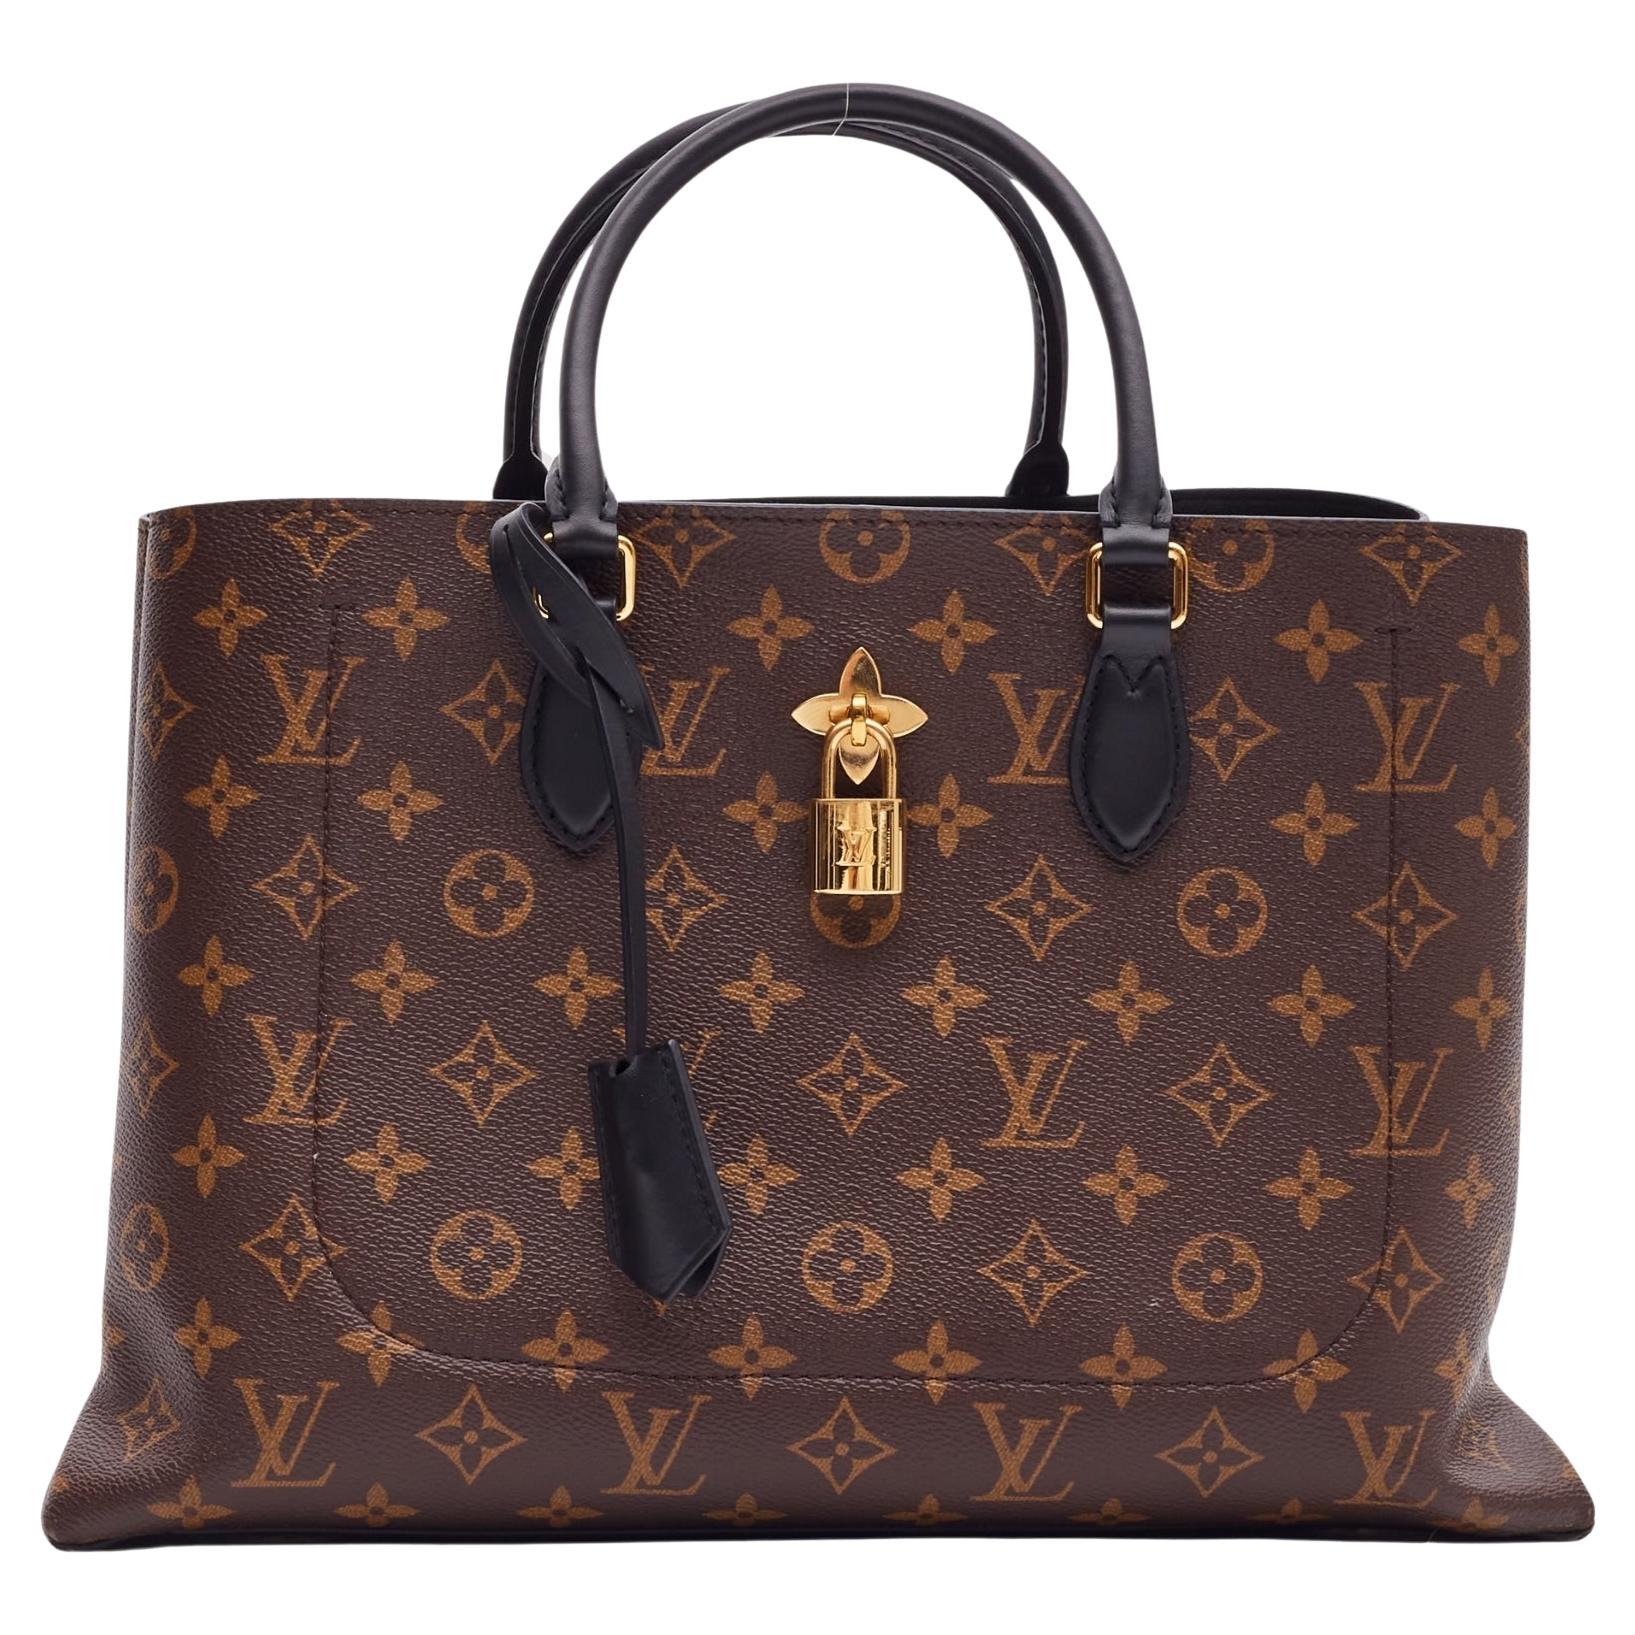 Louis Vuitton Monogram Flower Tote Black Leather Finishes